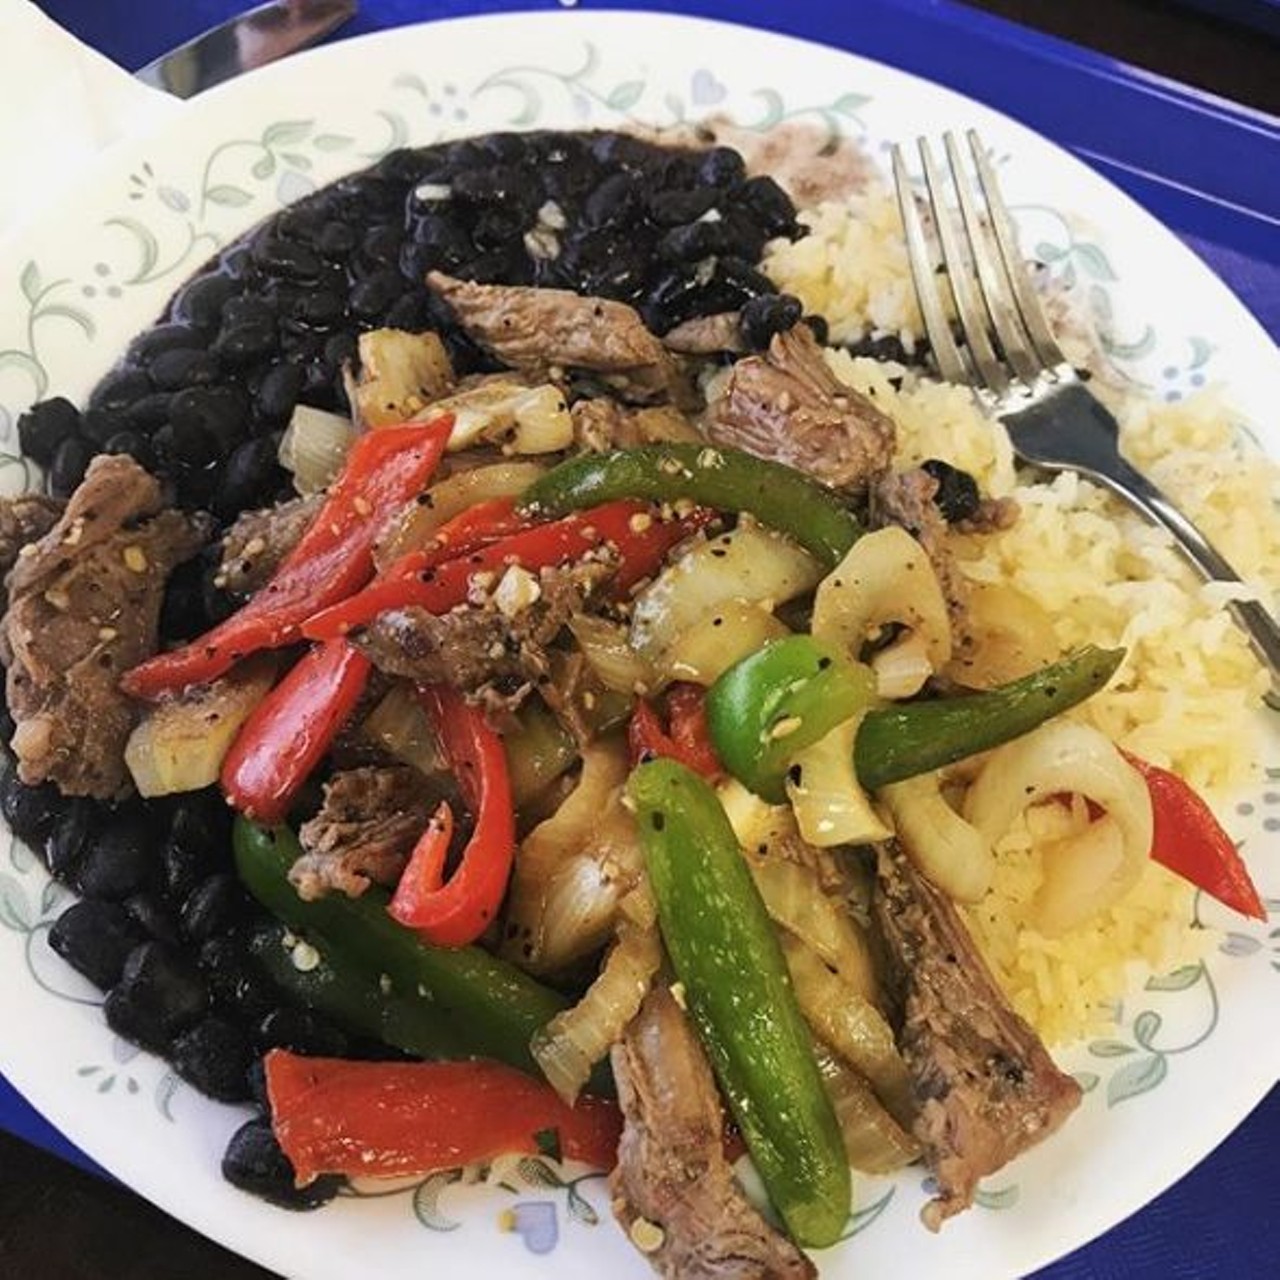 Casa Lupita Restaurant  
160 W. Lake Mary Blvd., Sanford, 407-878-7114
This affordable mom-and-pop Salvadoran restaurant knows that keeping things simple is the way to go. Their pupusas and nuegados are definitely the way to go.
Photo via janeycatherine/ Instagram